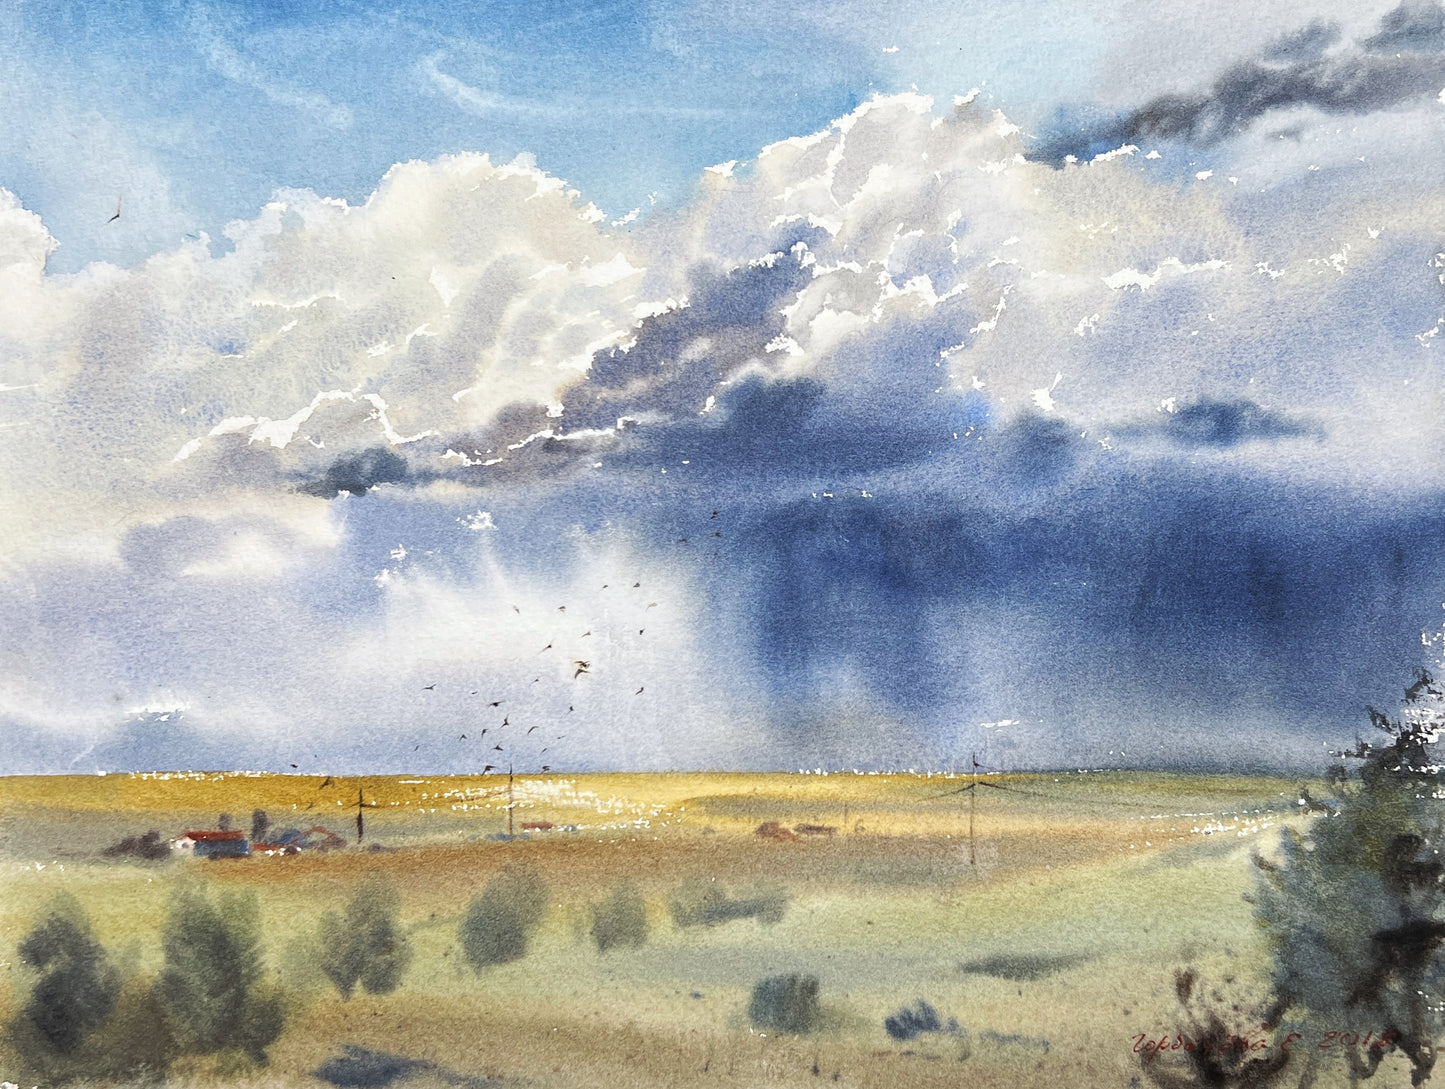 Country Landscape Painting, Watercolor Original Artwork, Nature Art, Rainy Day, Rural Wall Decor, Cloud Sky, Gift